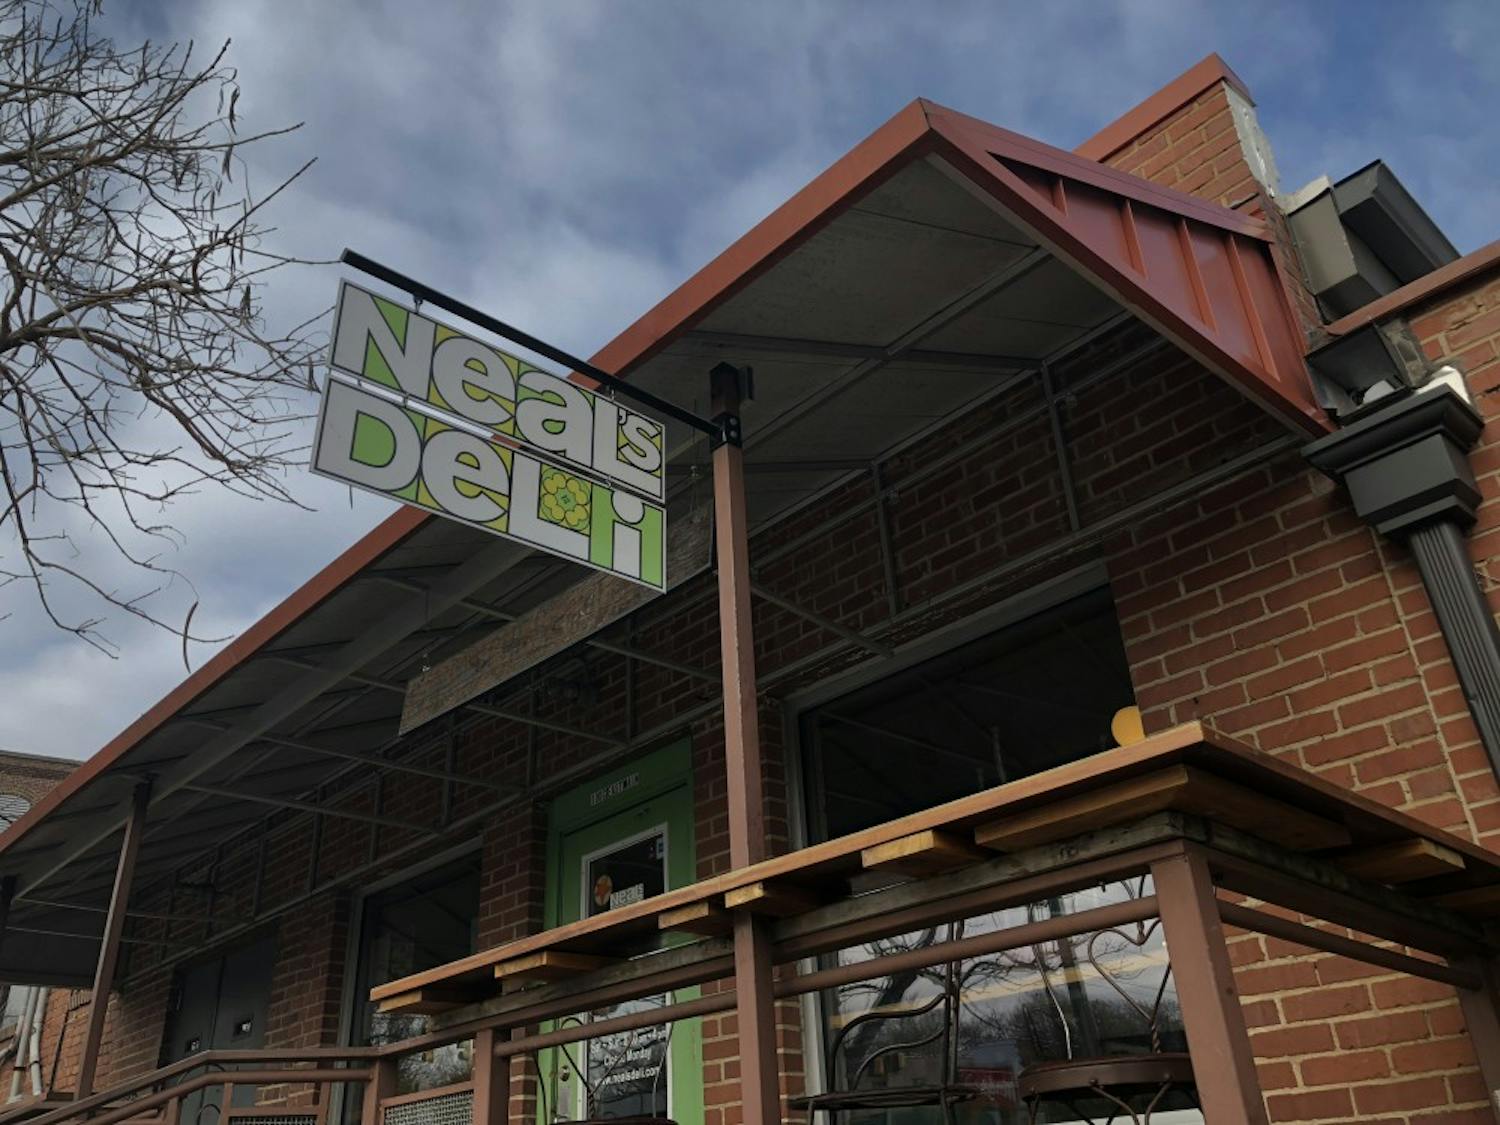 Neal's Deli, located near Open Eye Cafe in Carrboro, is a popular destination for breakfast or lunch.